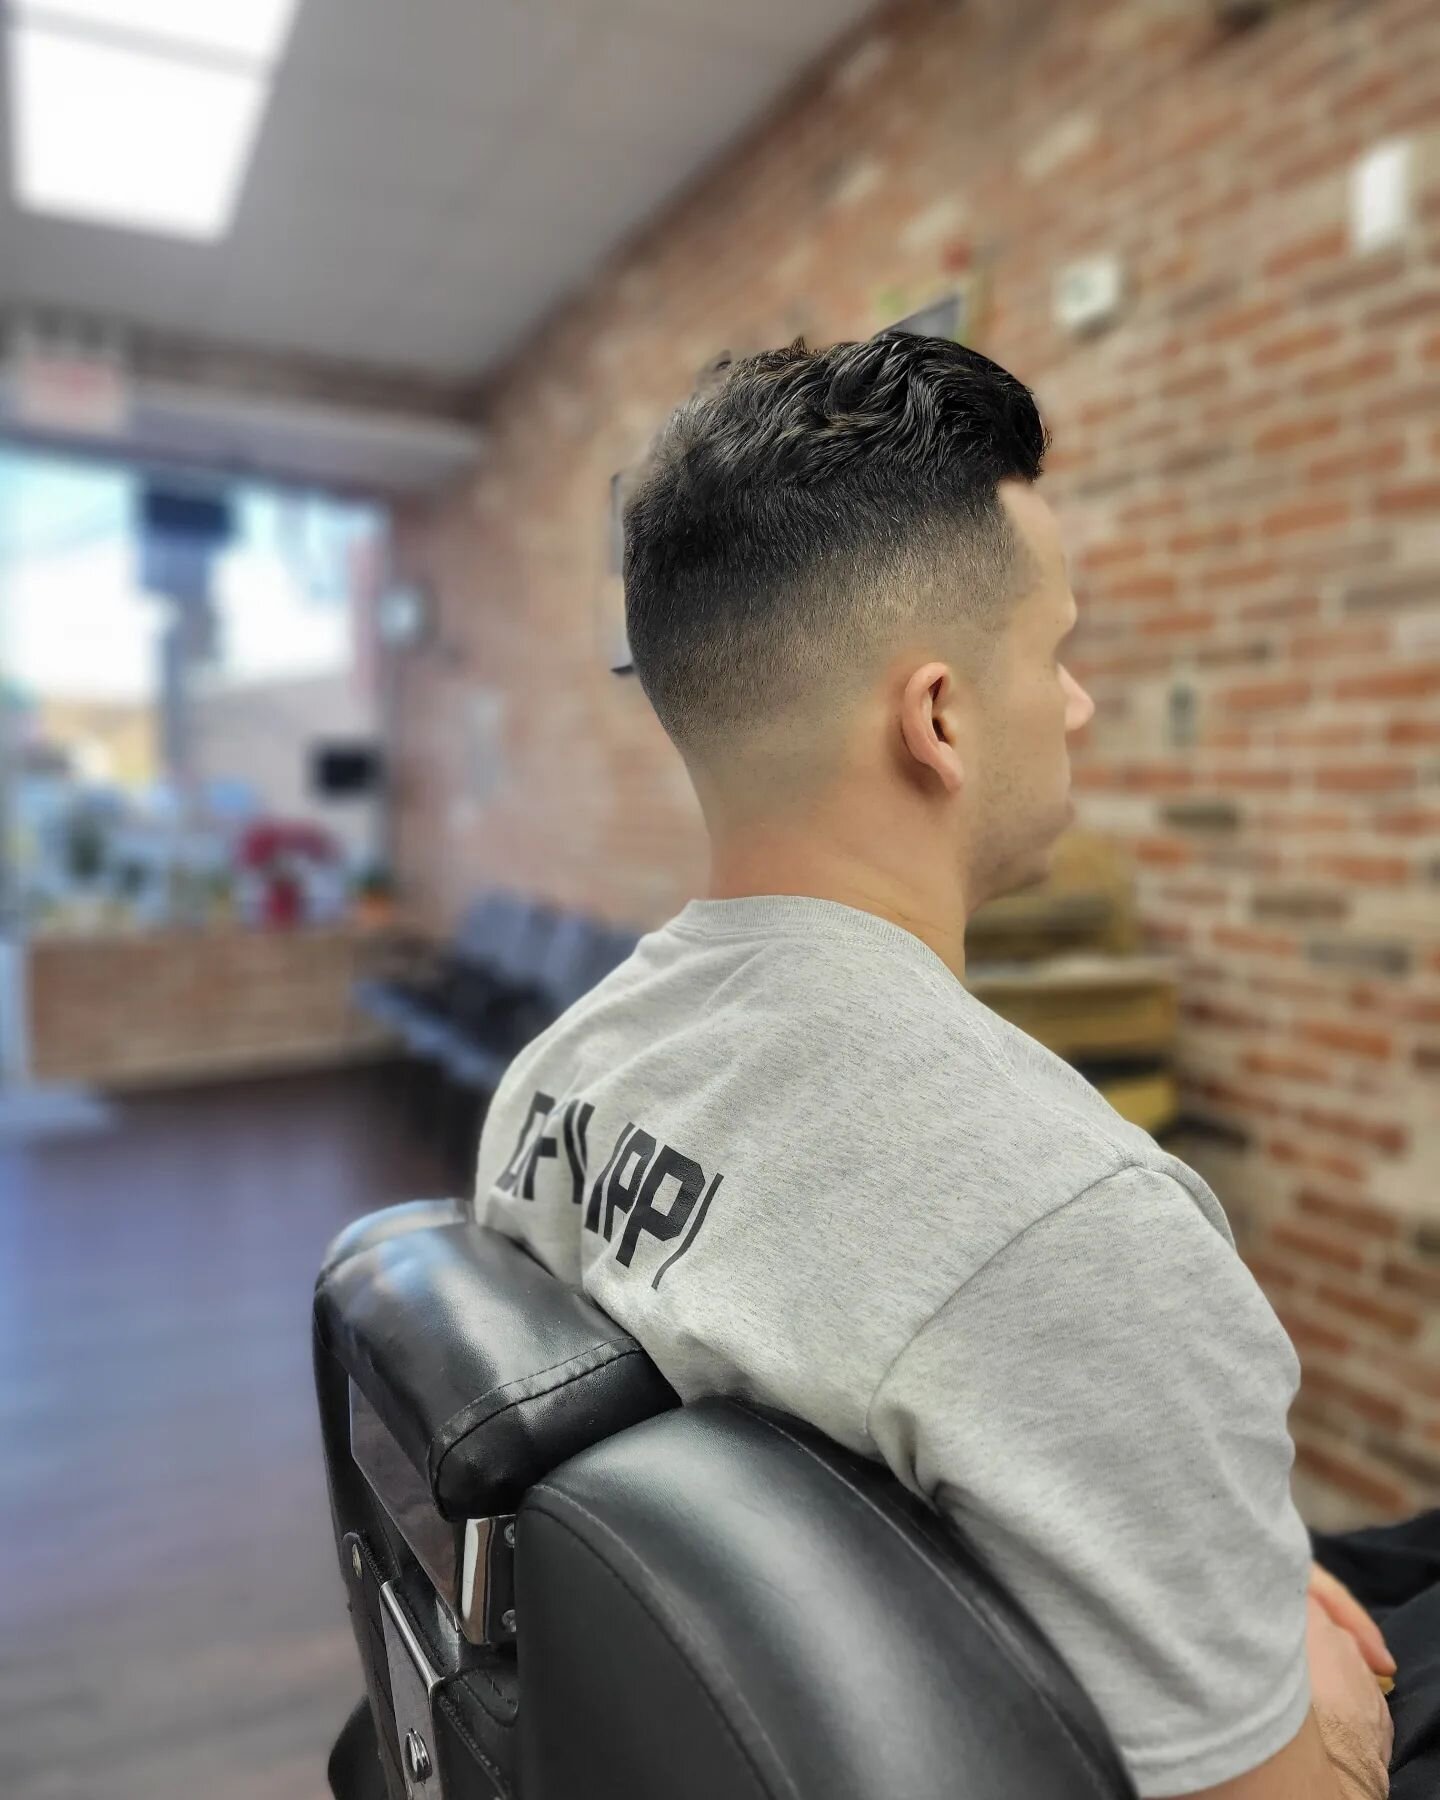 💈Stop by for your last minute holiday haircuts 🎅

#barbershop #haircut
#barber #barbershopconnect #barberlove #barberconnect #manhassetbarbers #manhasset&nbsp; #plandomeroad #manhassetmoms #11030